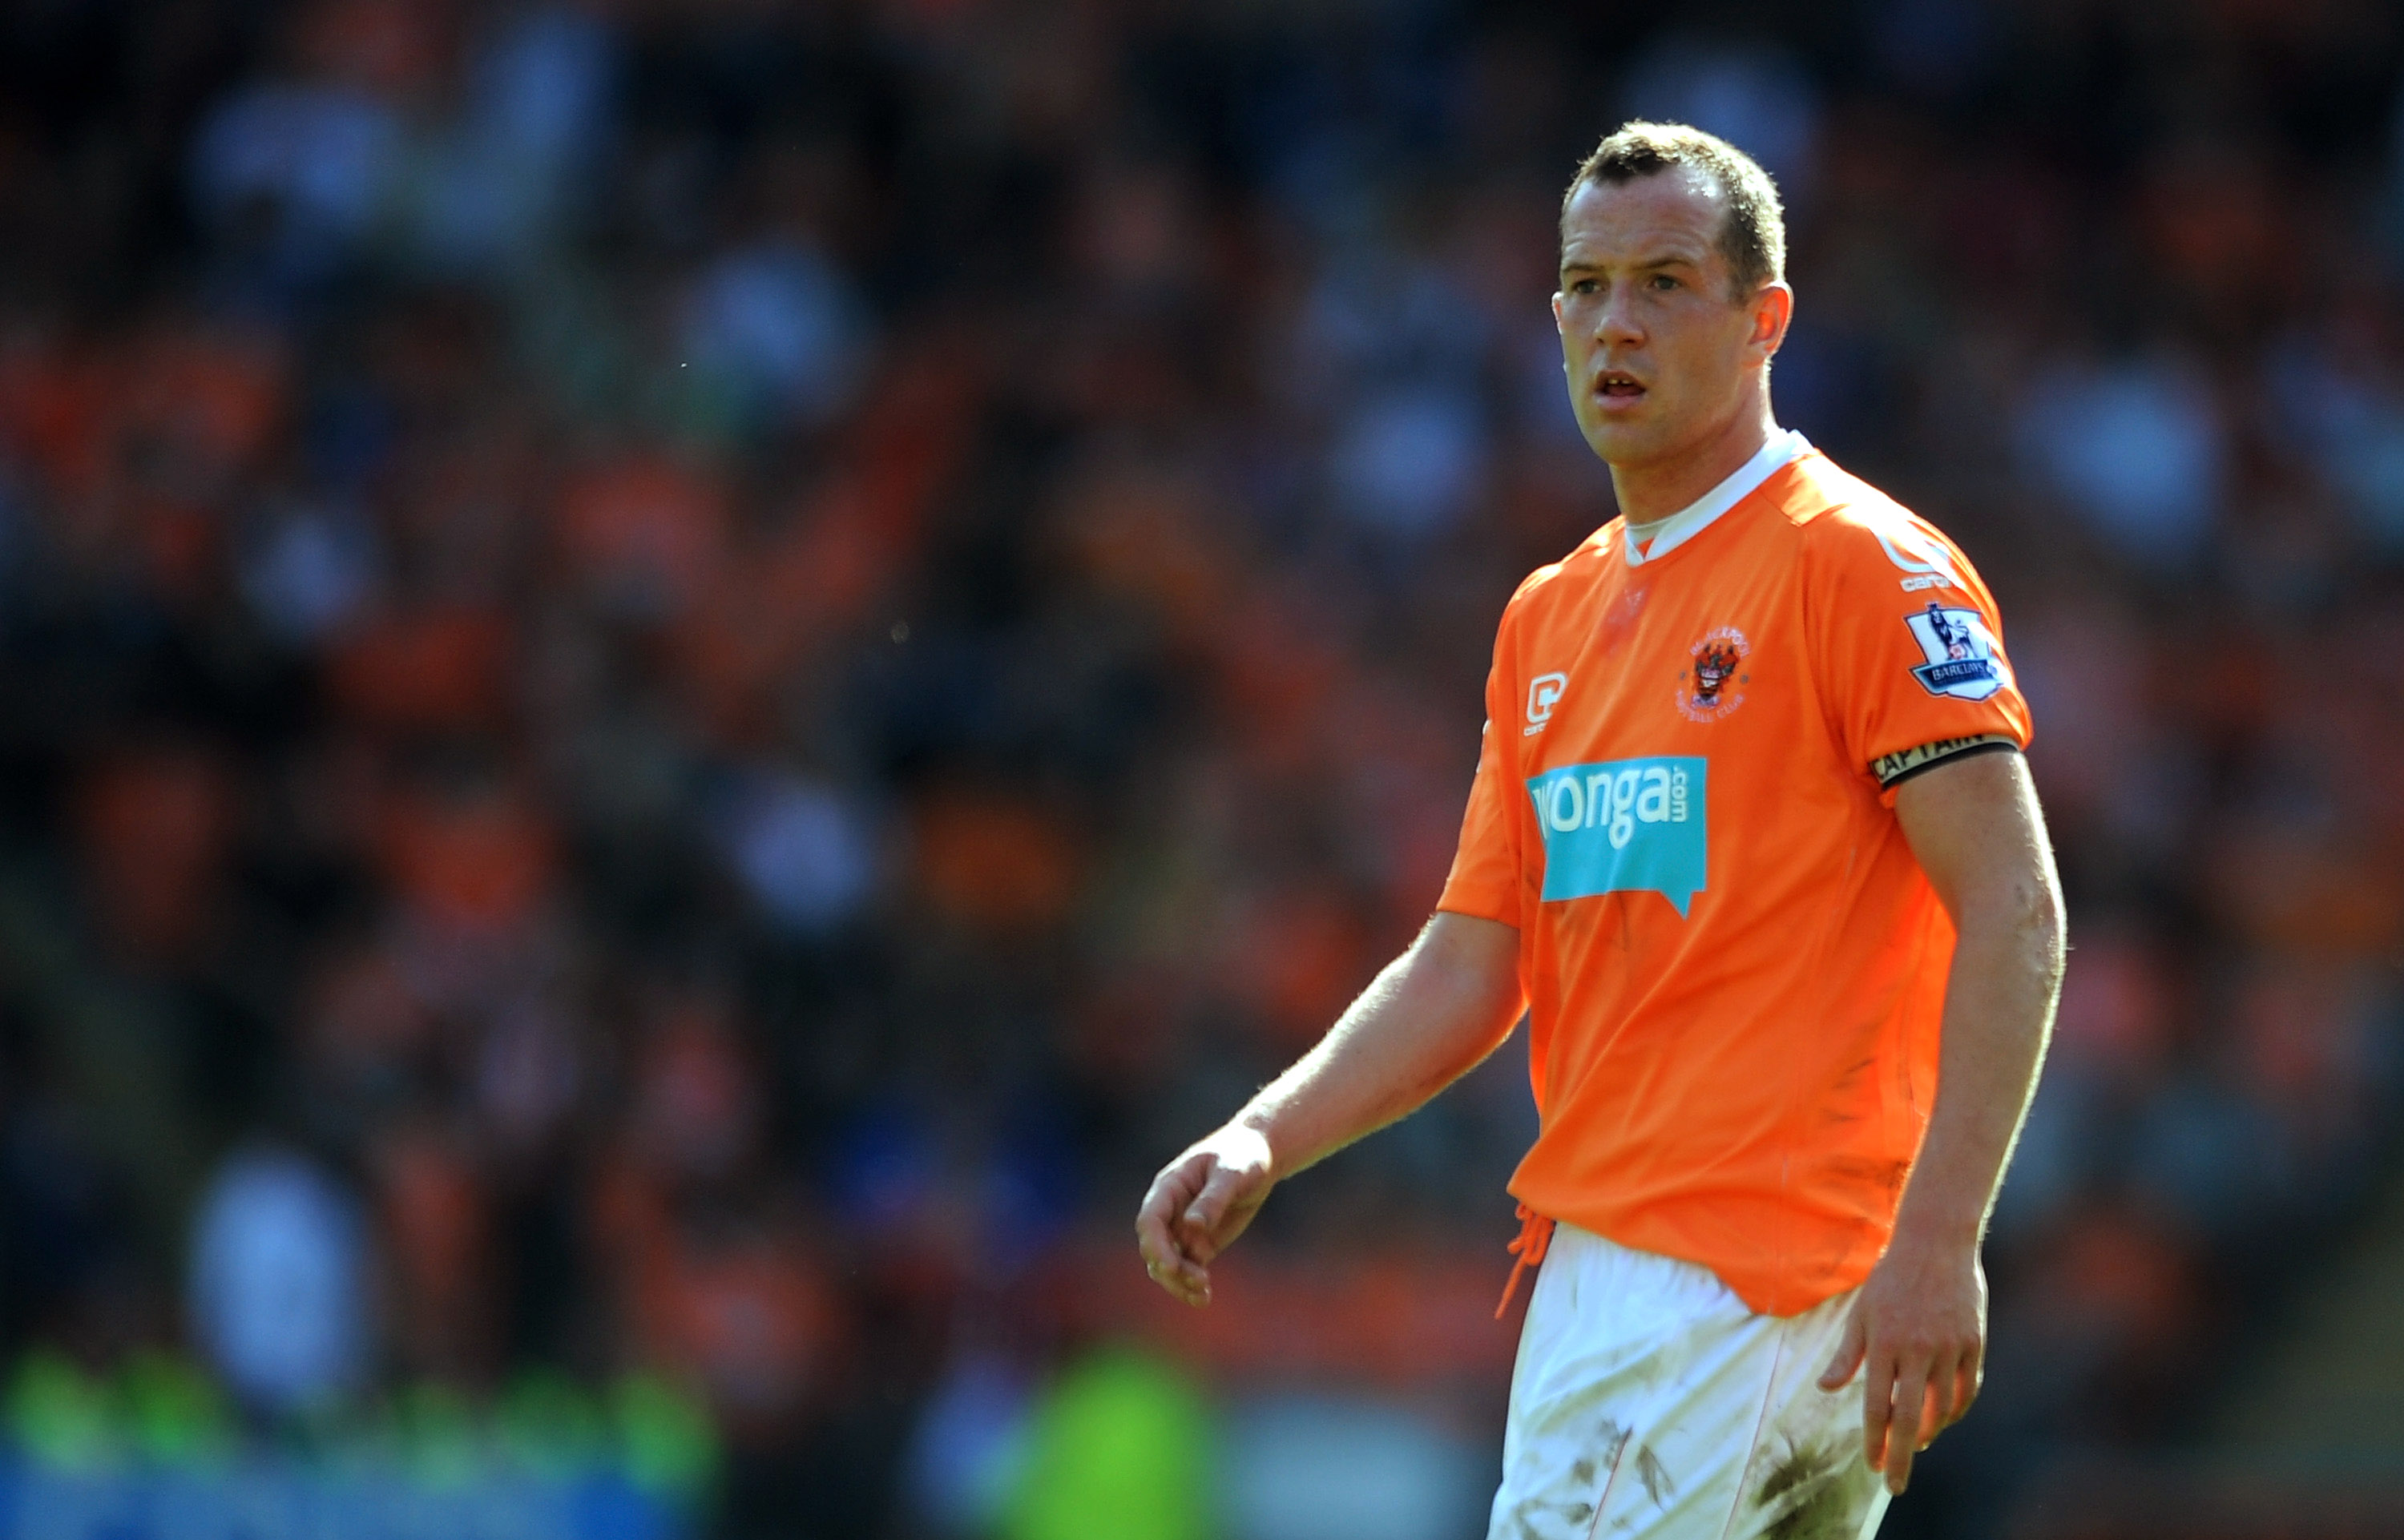 BLACKPOOL, ENGLAND - APRIL 10:  Charlie Adam of Blackpool looks on during the Barclays Premier League match between Blackpool and Arsenal at Bloomfield Road on April 10, 2011 in Blackpool, England.  (Photo by Chris Brunskill/Getty Images)